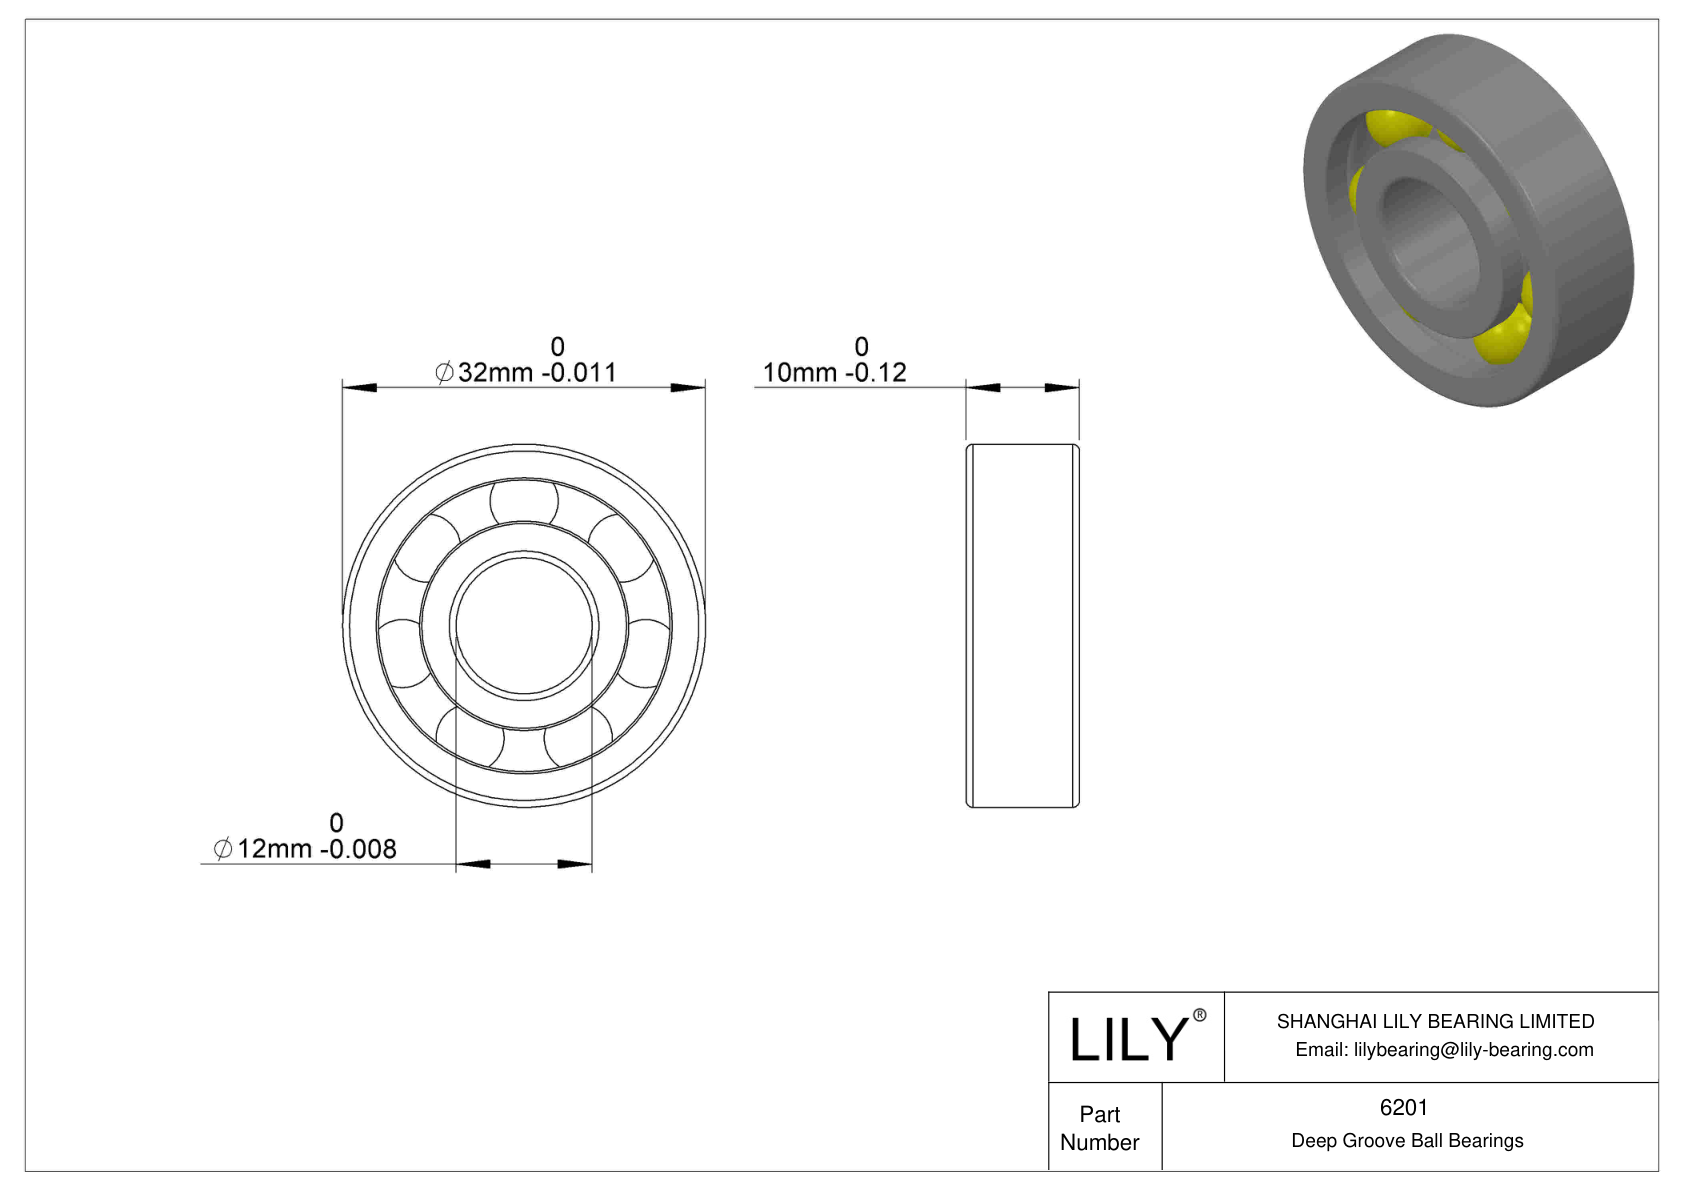 LILY-BS620140-18 POM Coated Bearing cad drawing